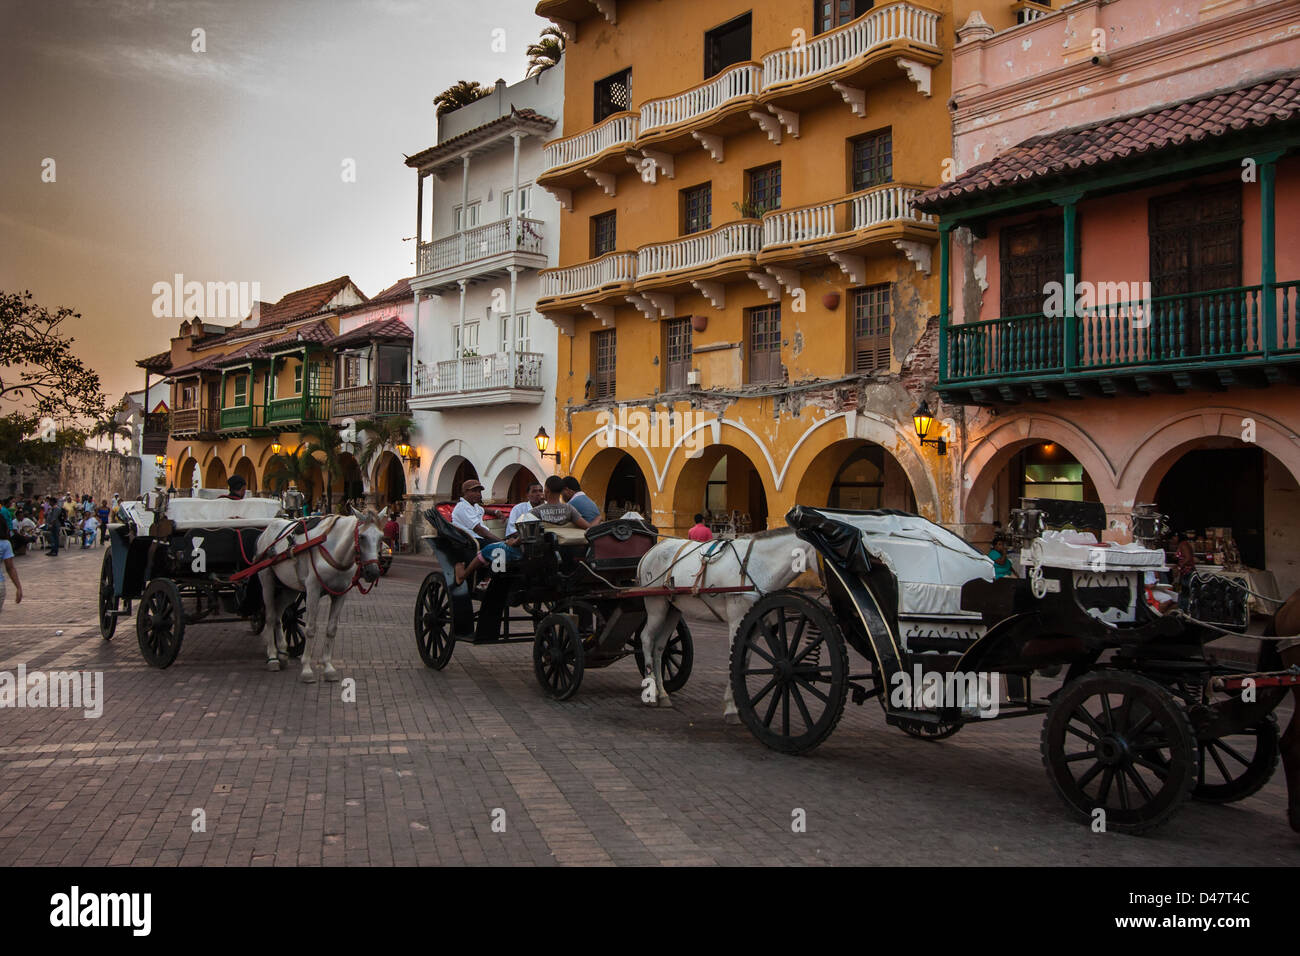 Picture taken in Cartagena, Colombia Stock Photo